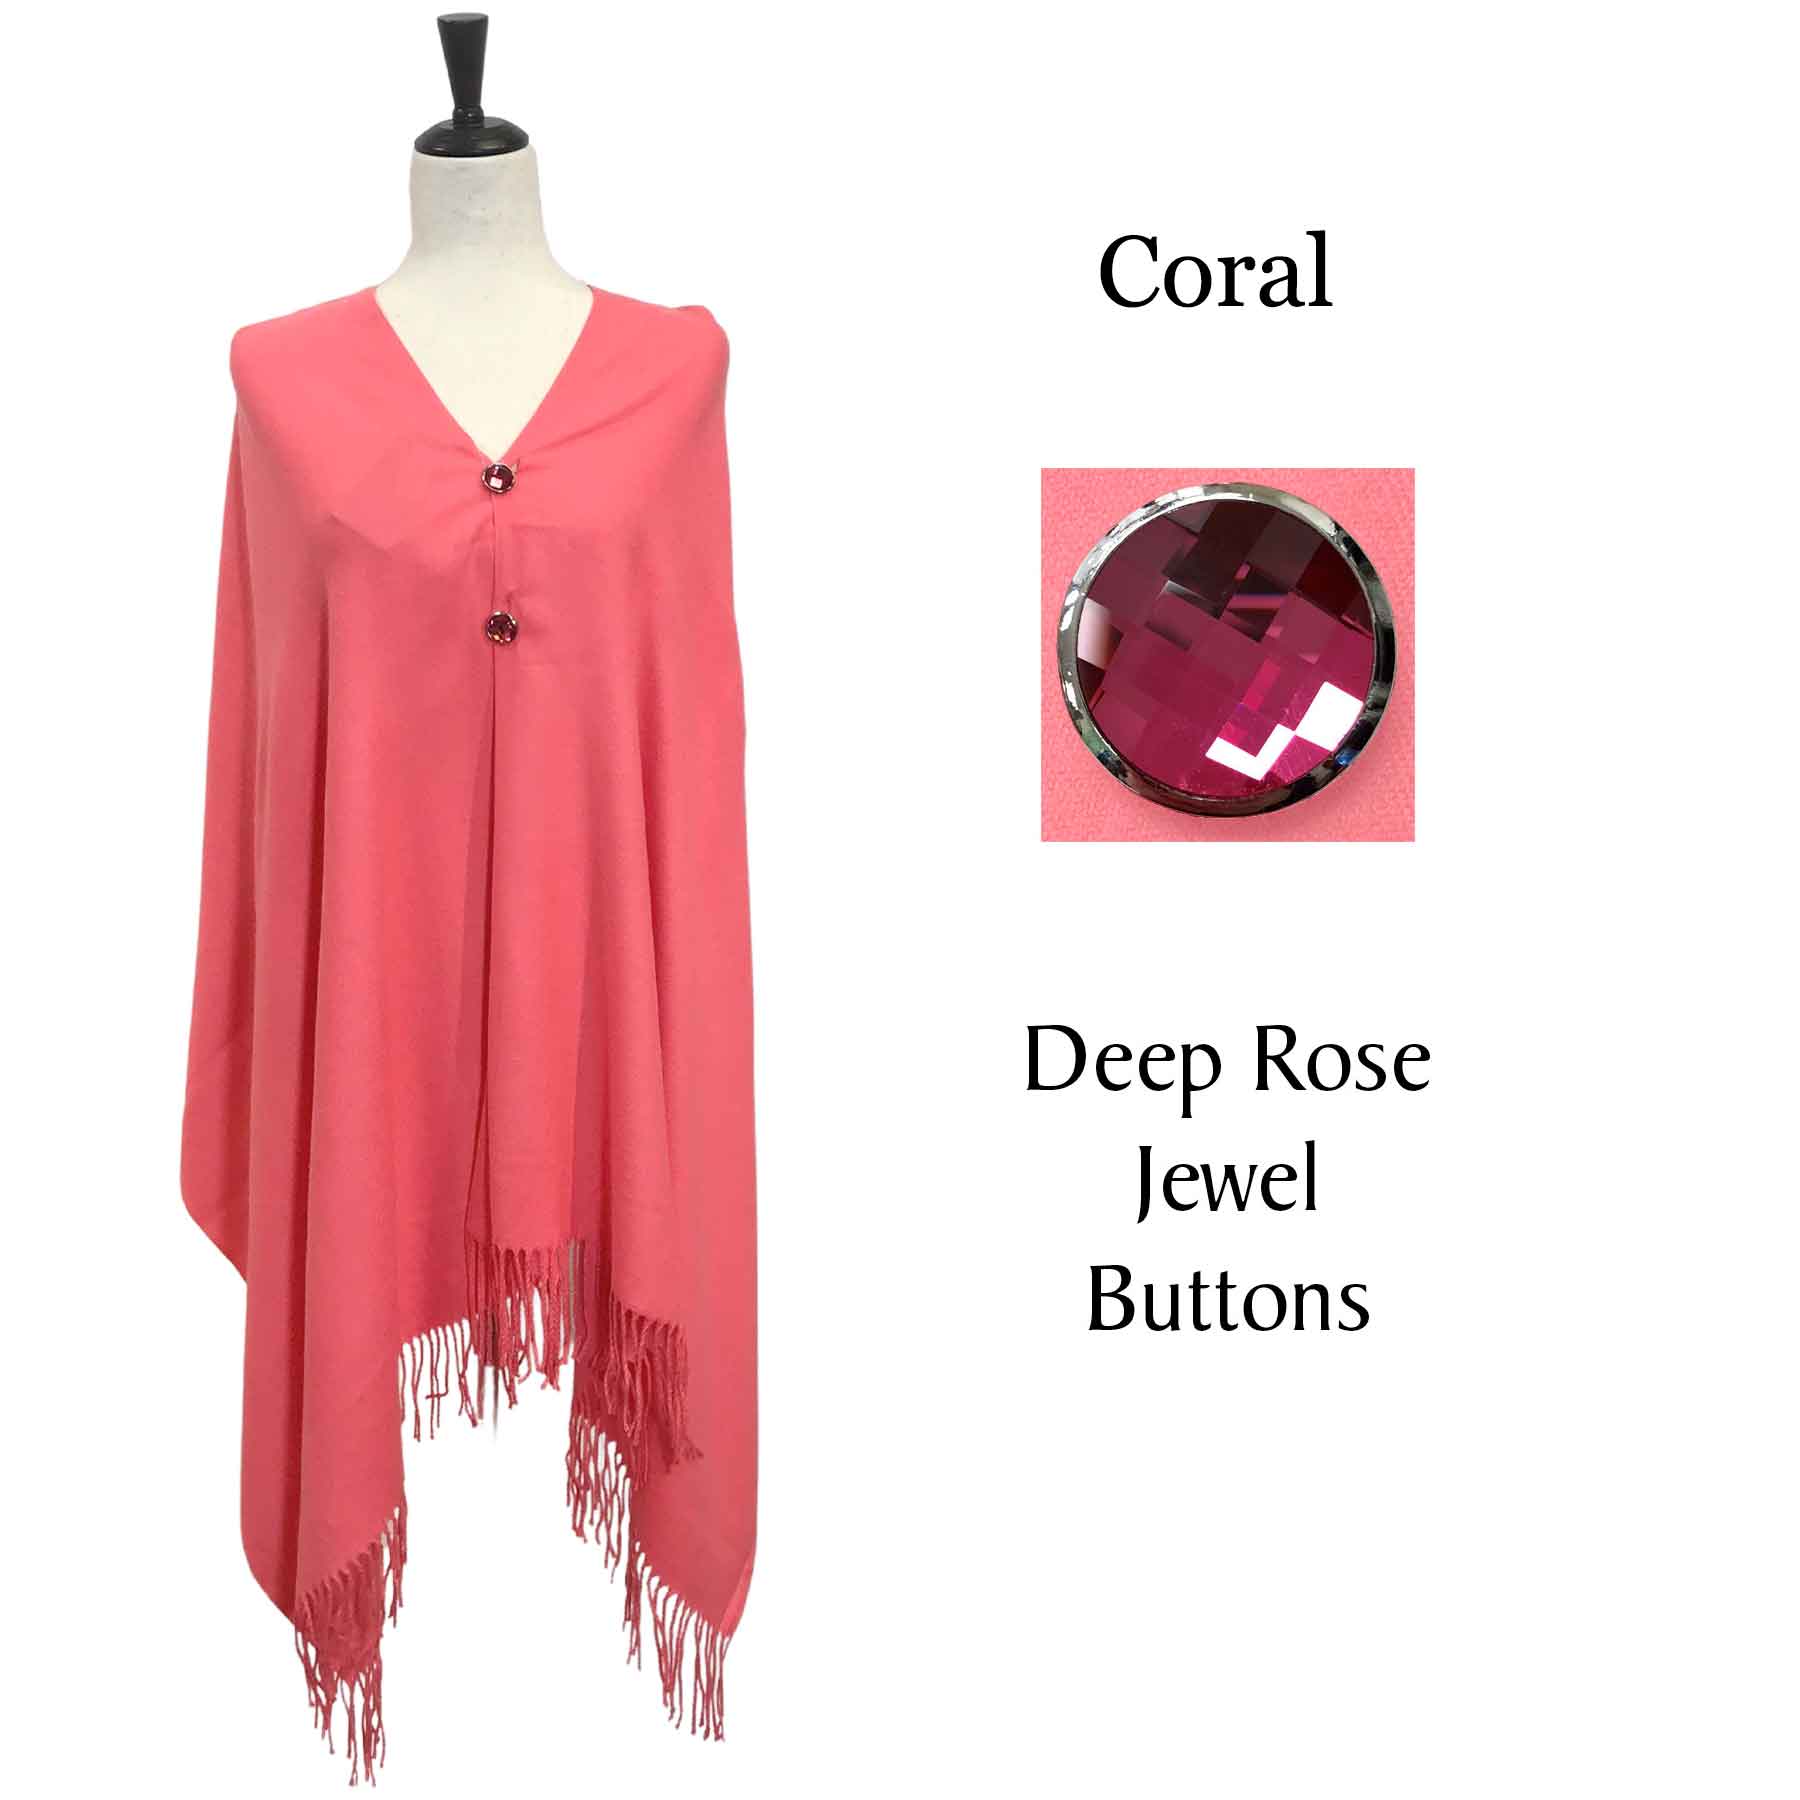 534 - Cashmere Feel Shawls w/Jeweled Buttons #31 Coral with Deep Rose Jewel Buttons H1800 - 29